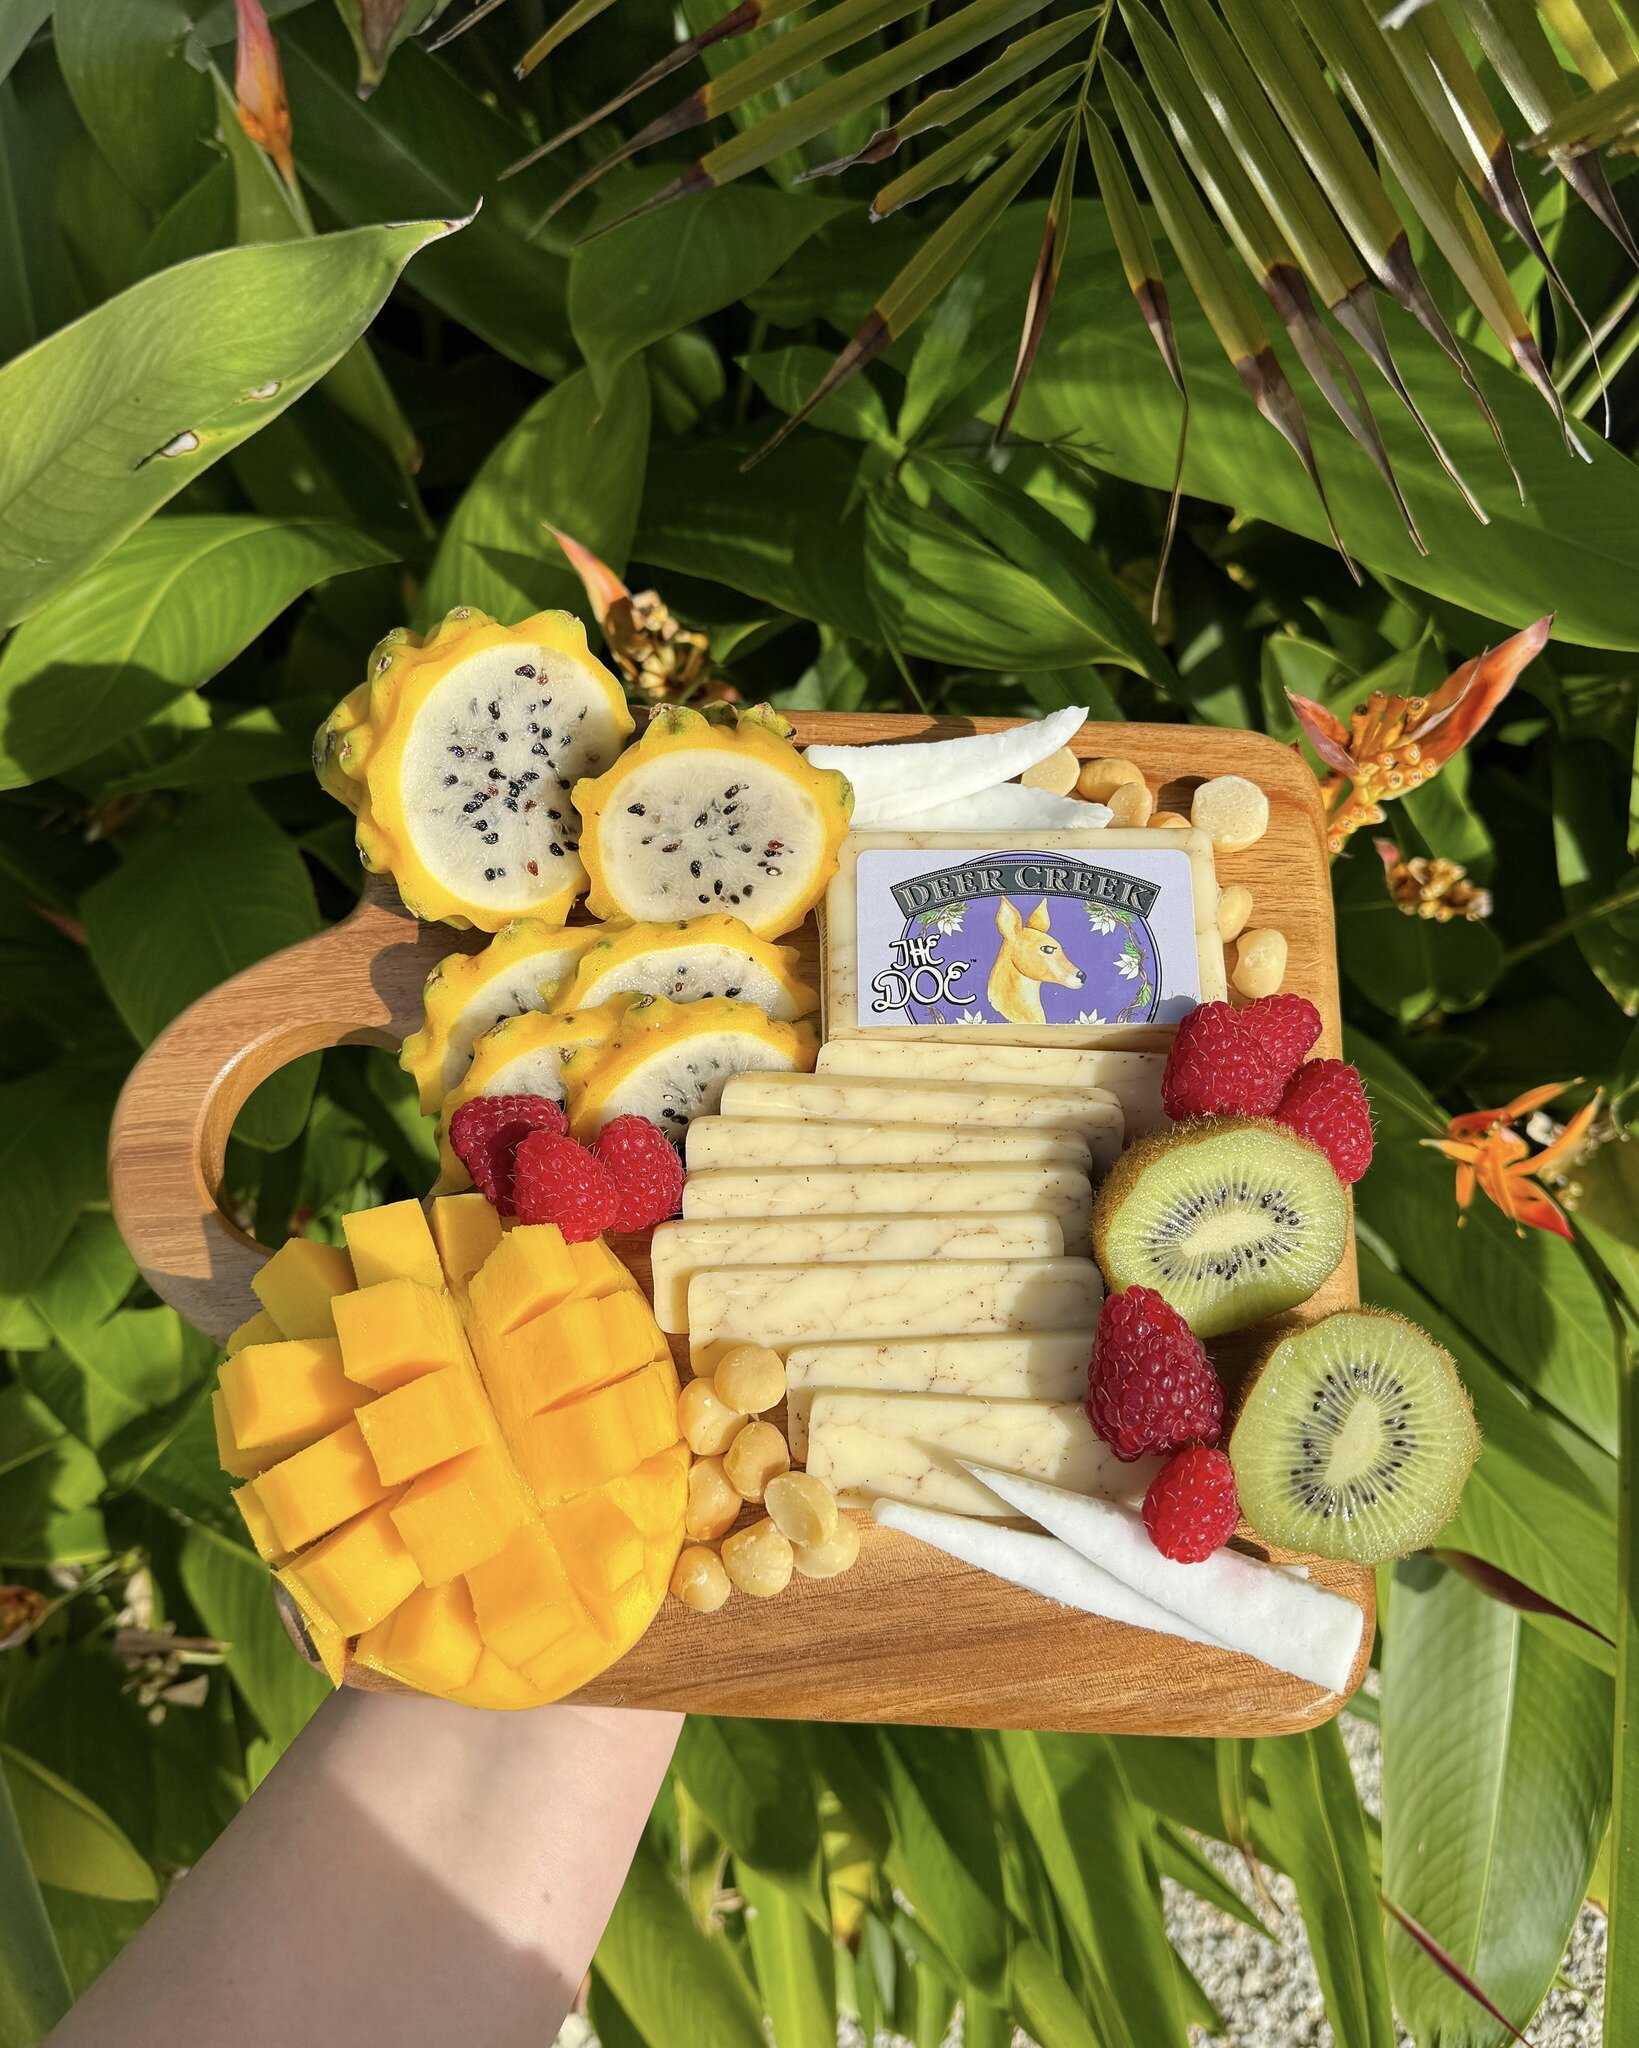 If you're on Spring Break this week and visiting somewhere warm, try a taste of this tropical cheeseboard! 🏝️🥥 Dive into The Doe complemented by fresh coconut, dragonfruit, mango, raspberries, kiwi, and macadamia nuts. The vibrant fusion of sweet f